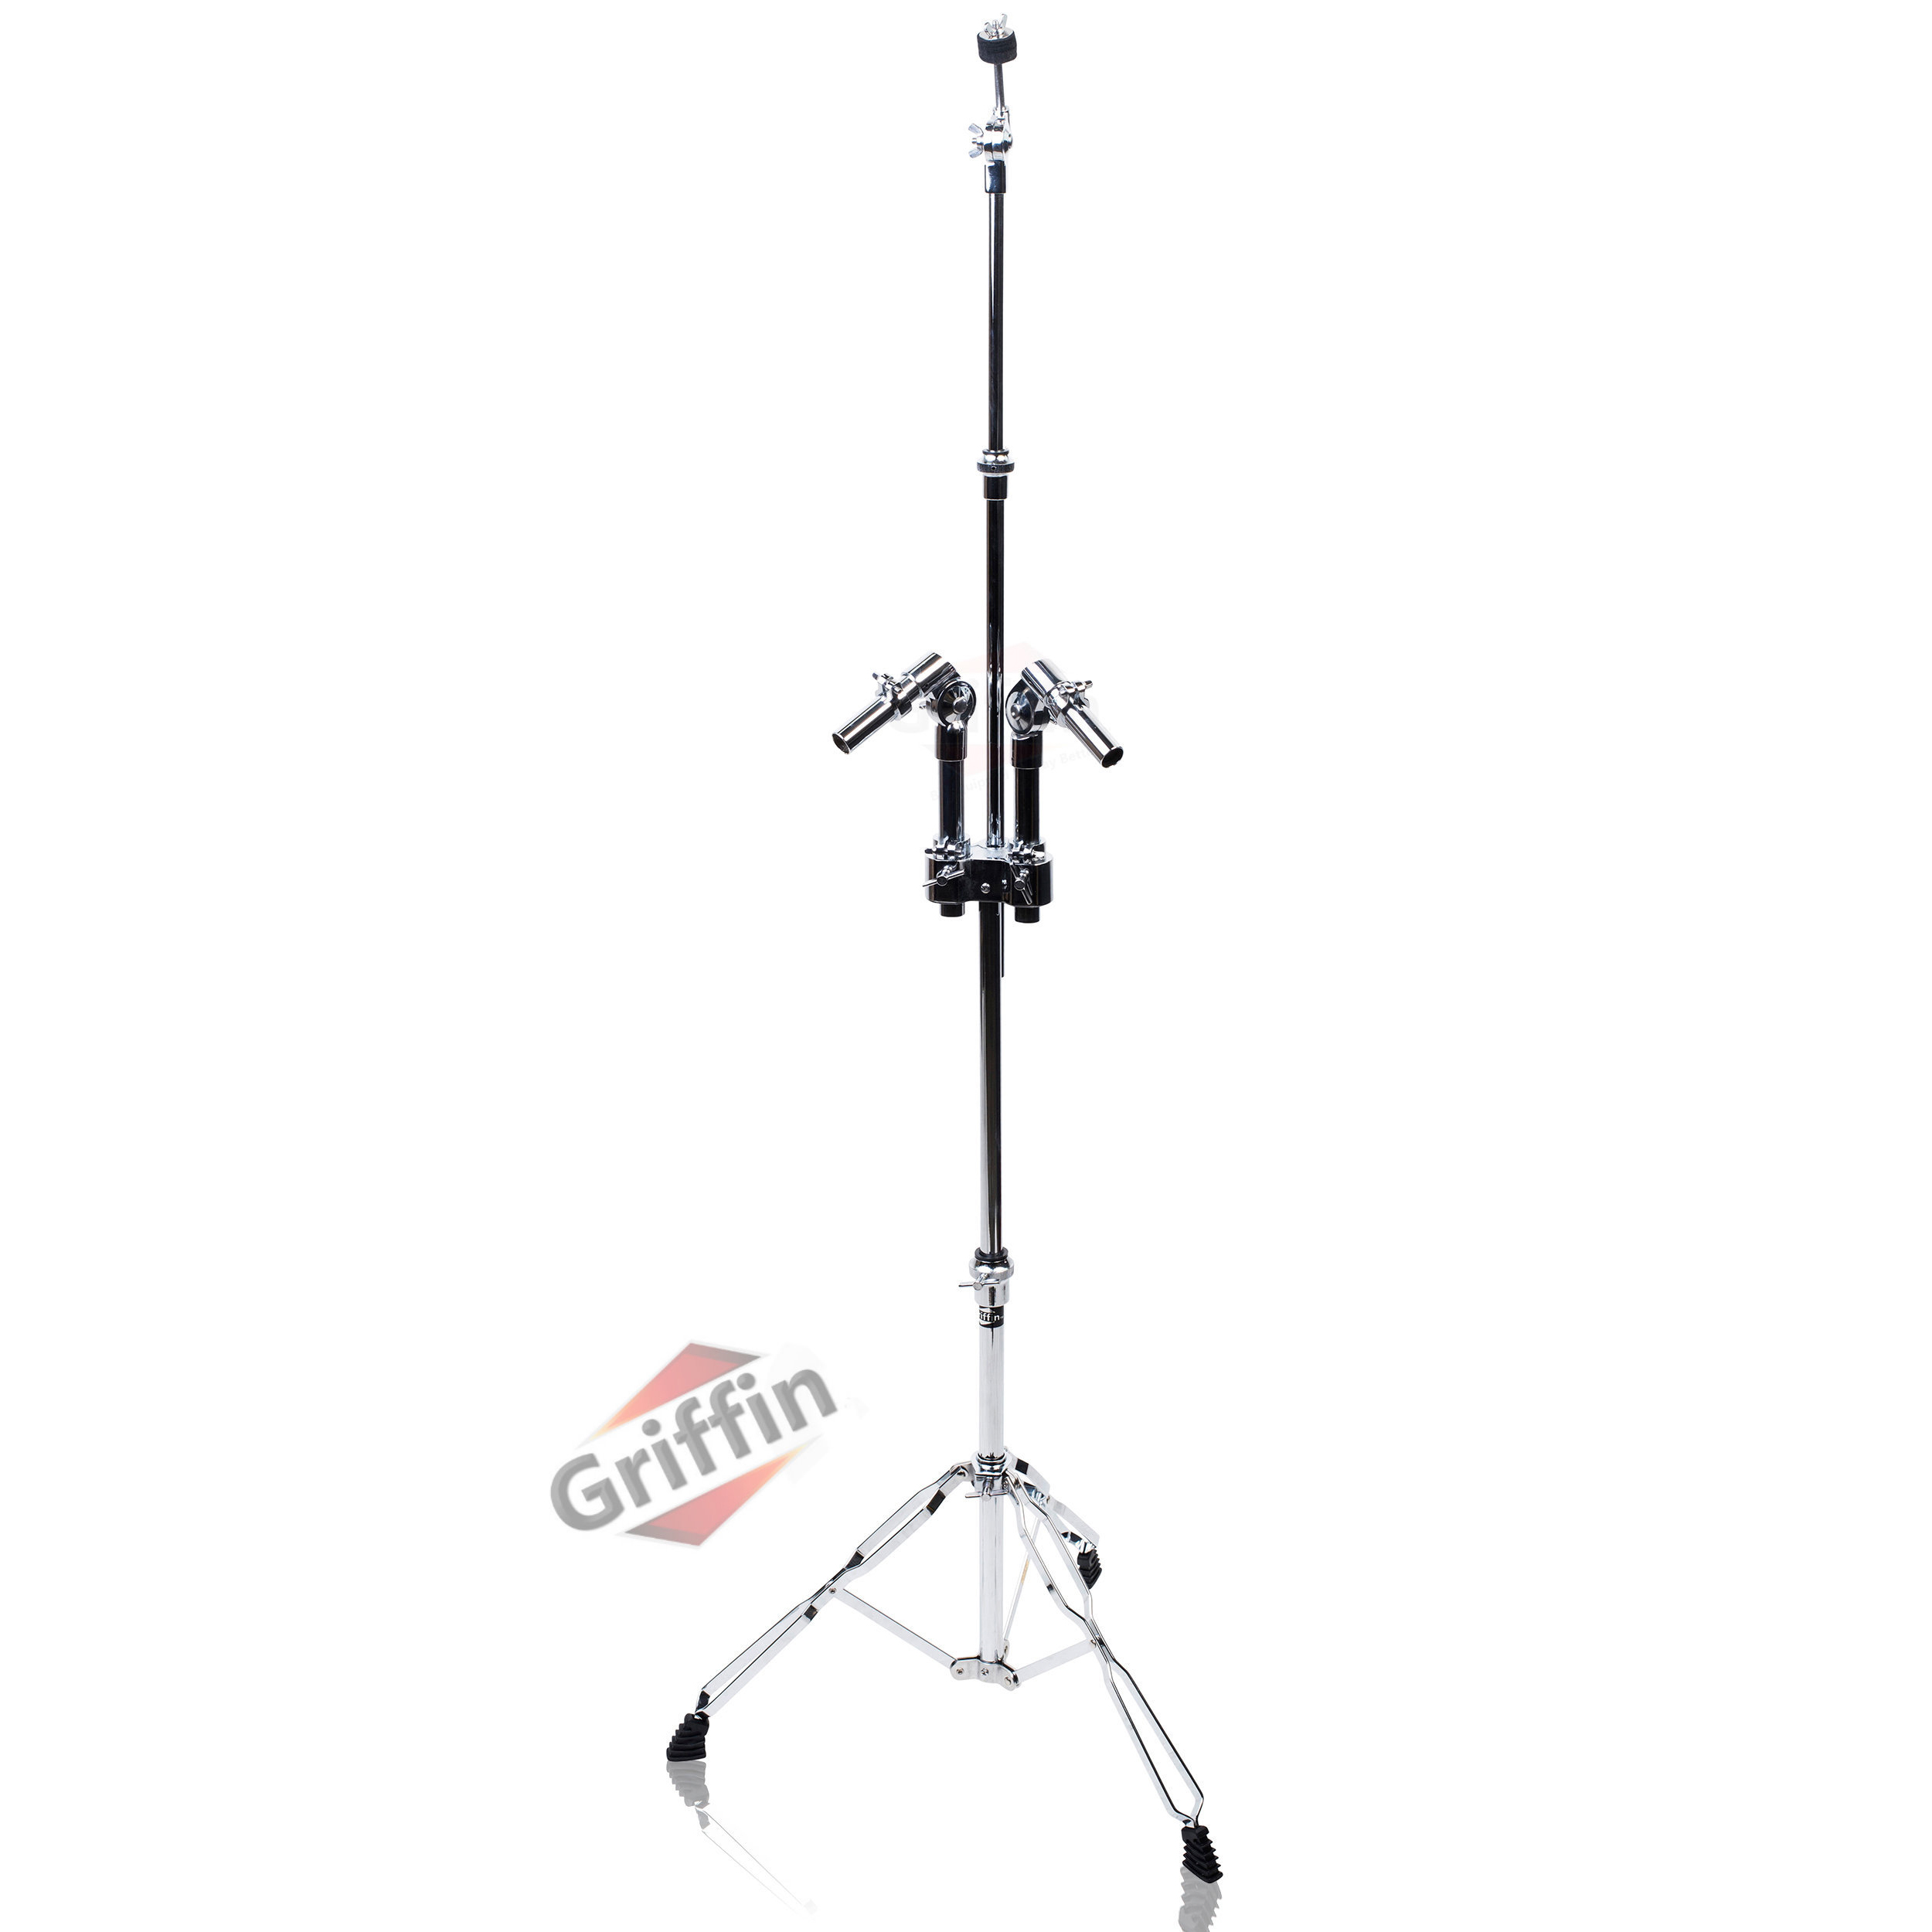 Double Tom Drum Stand - Griffin Cymbal Holder Mount Arm Duel Percussion Hardware